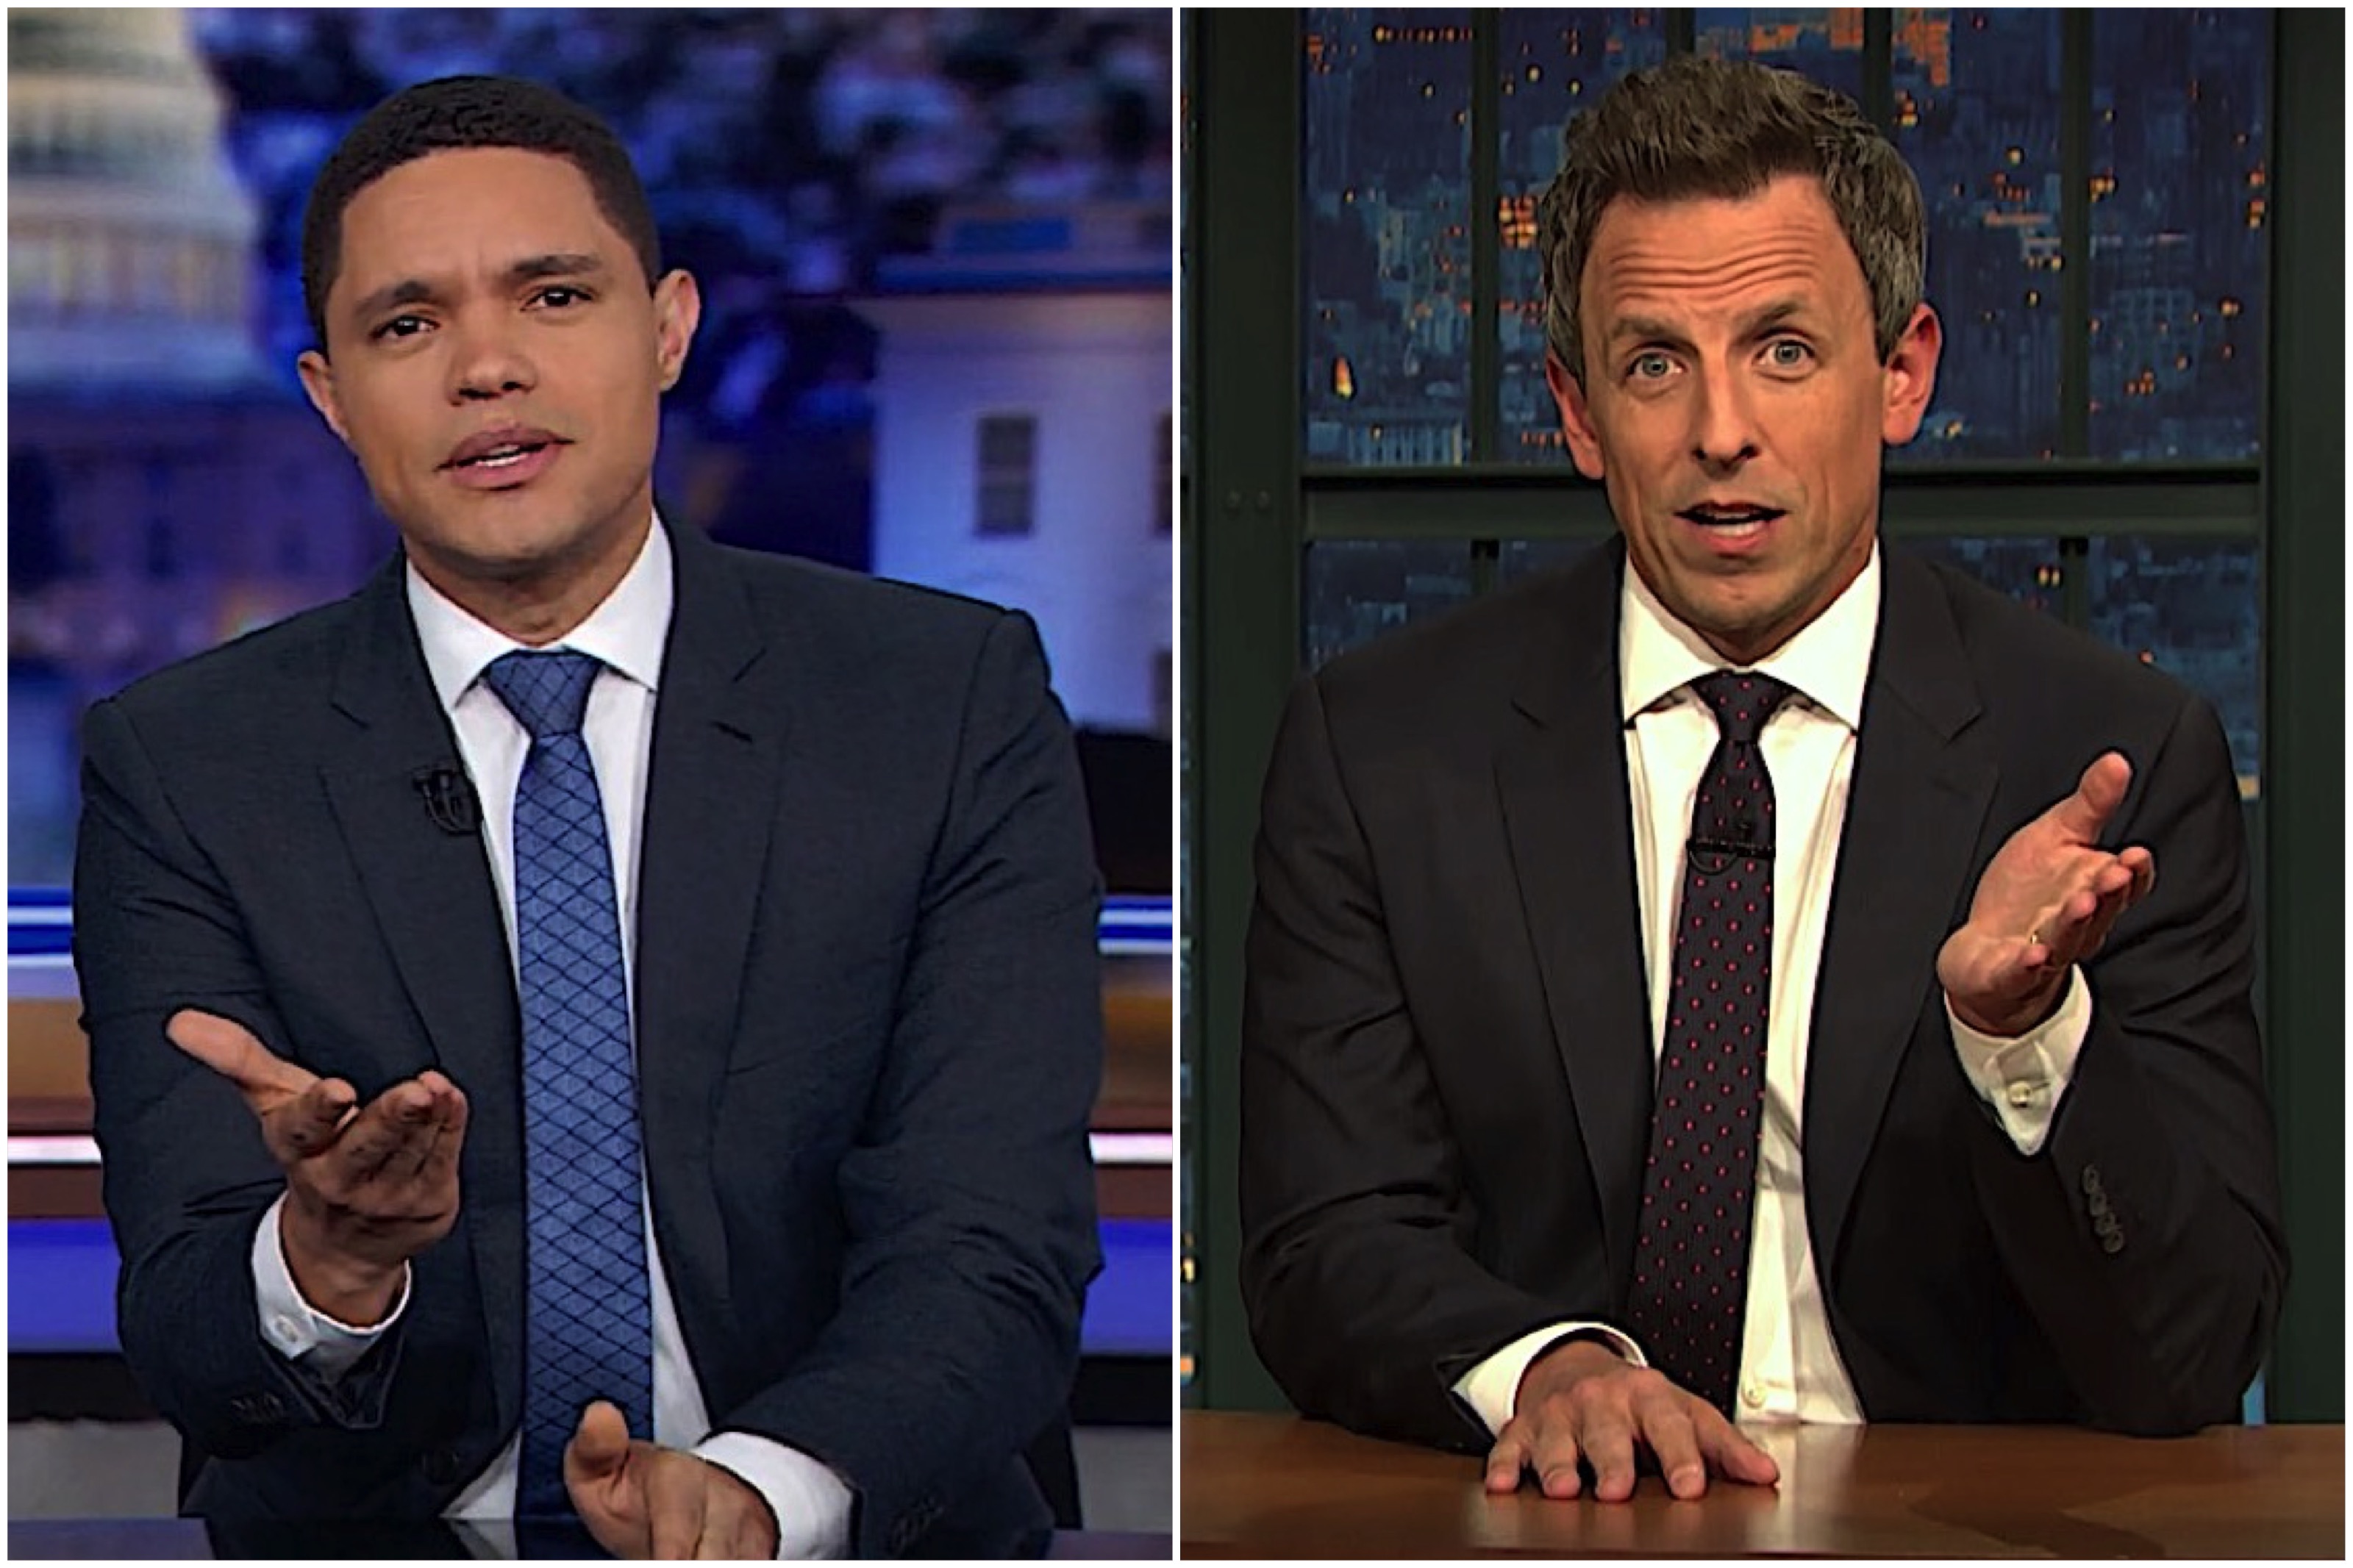 Seth Meyers and Trevor Noah on Bloomberg entering the race